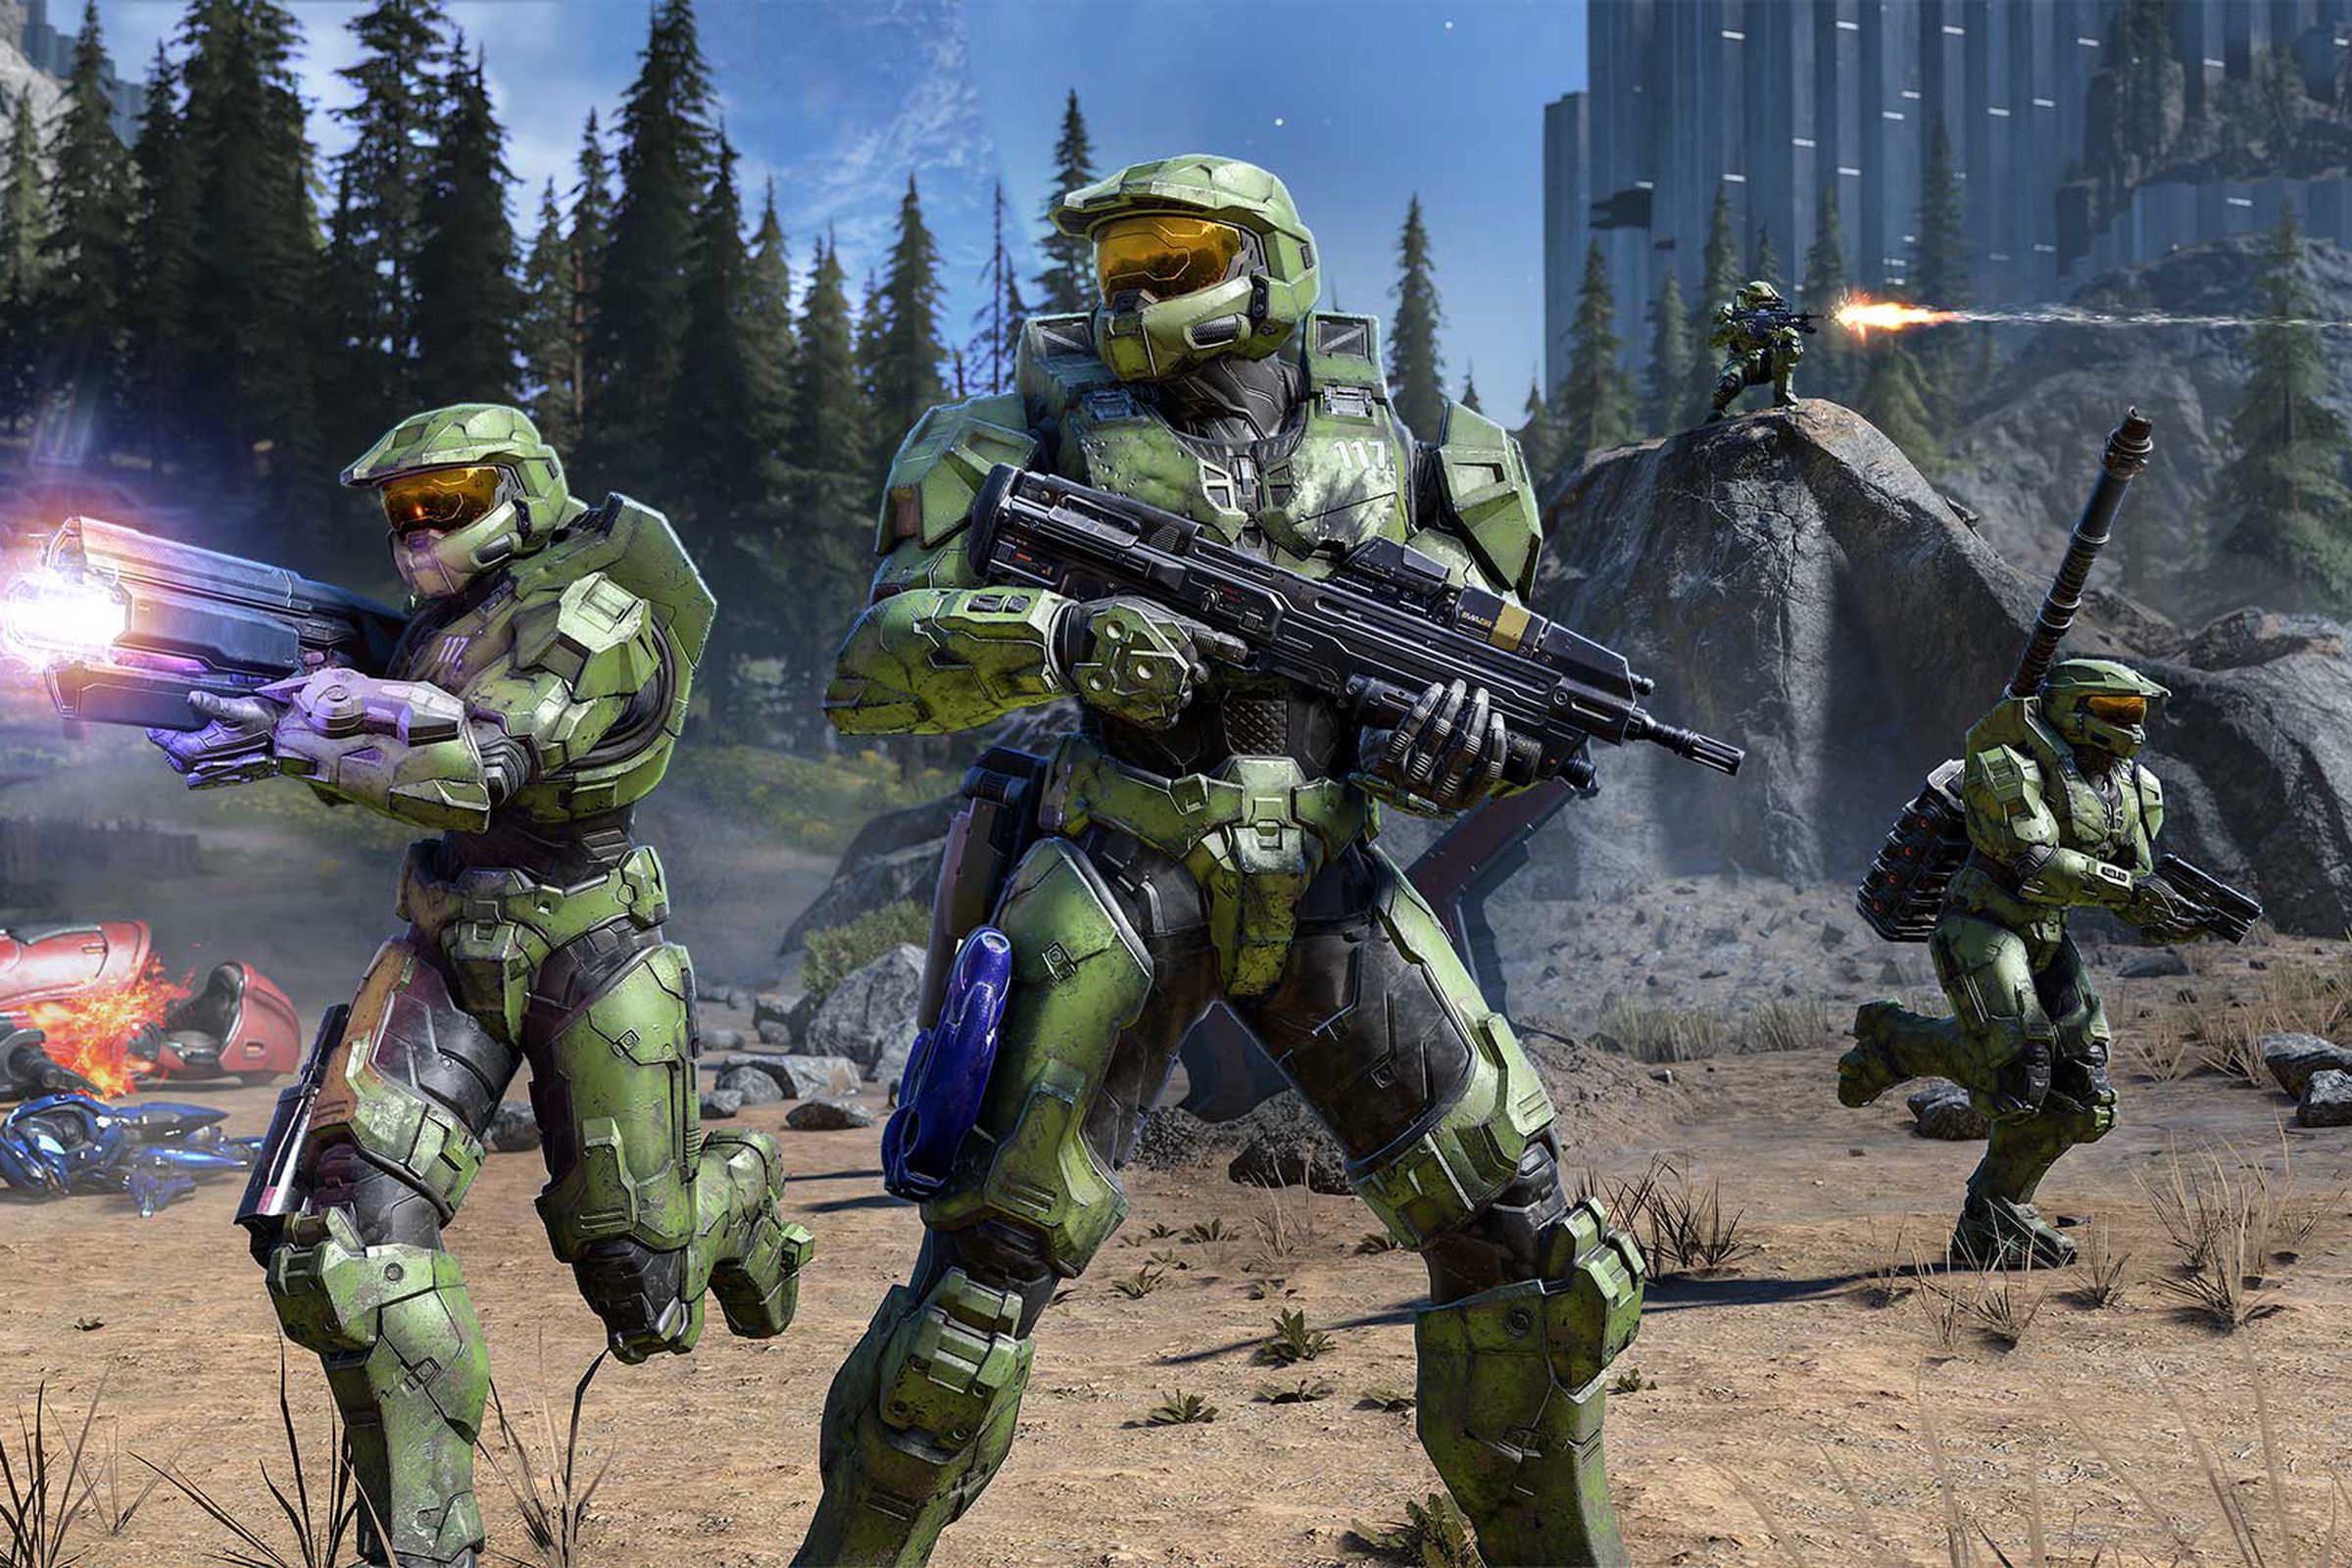 Windows Three Spartans are on the battlefield in Halo Infinite.